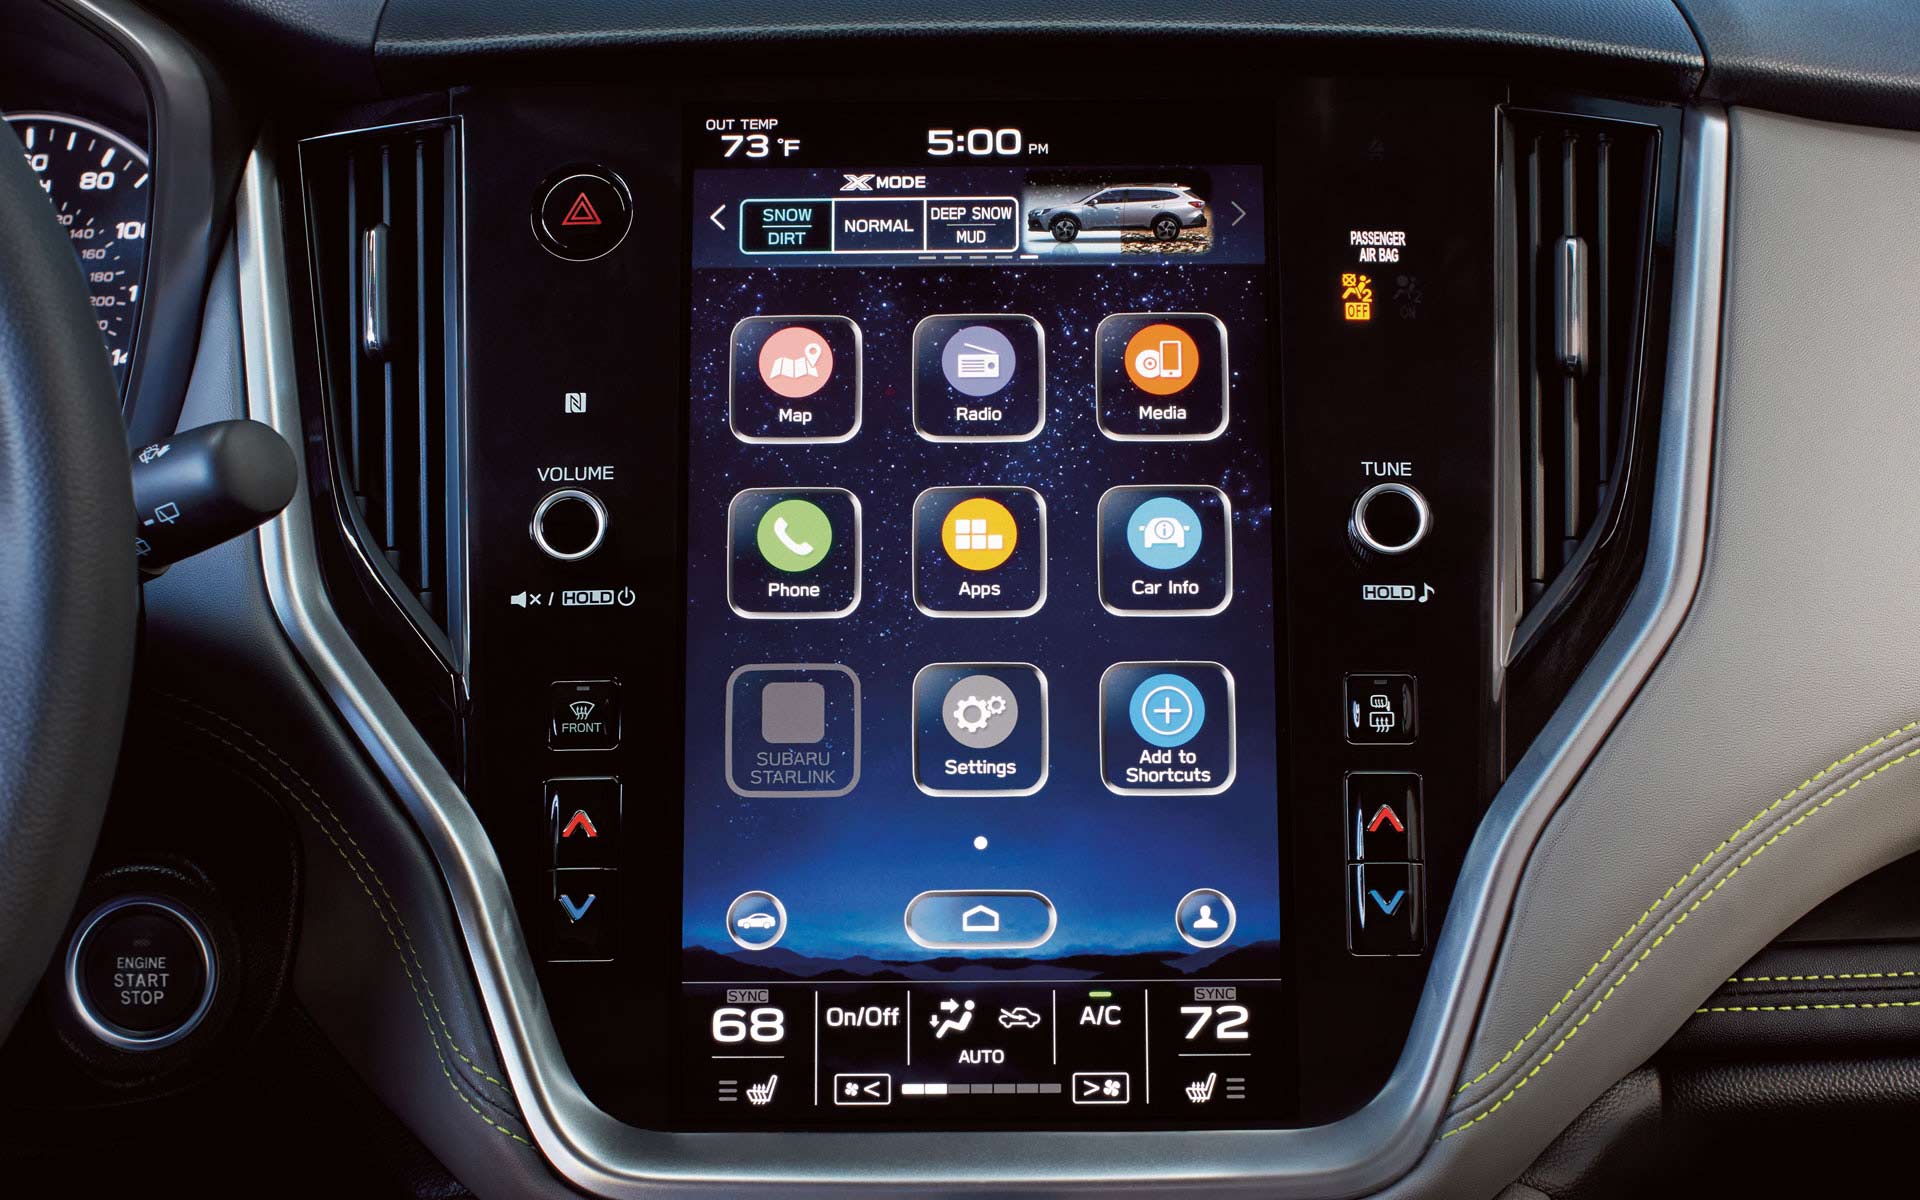 Subaru's in-vehicle touchscreen navigation technology with STARLINK Multimedia.